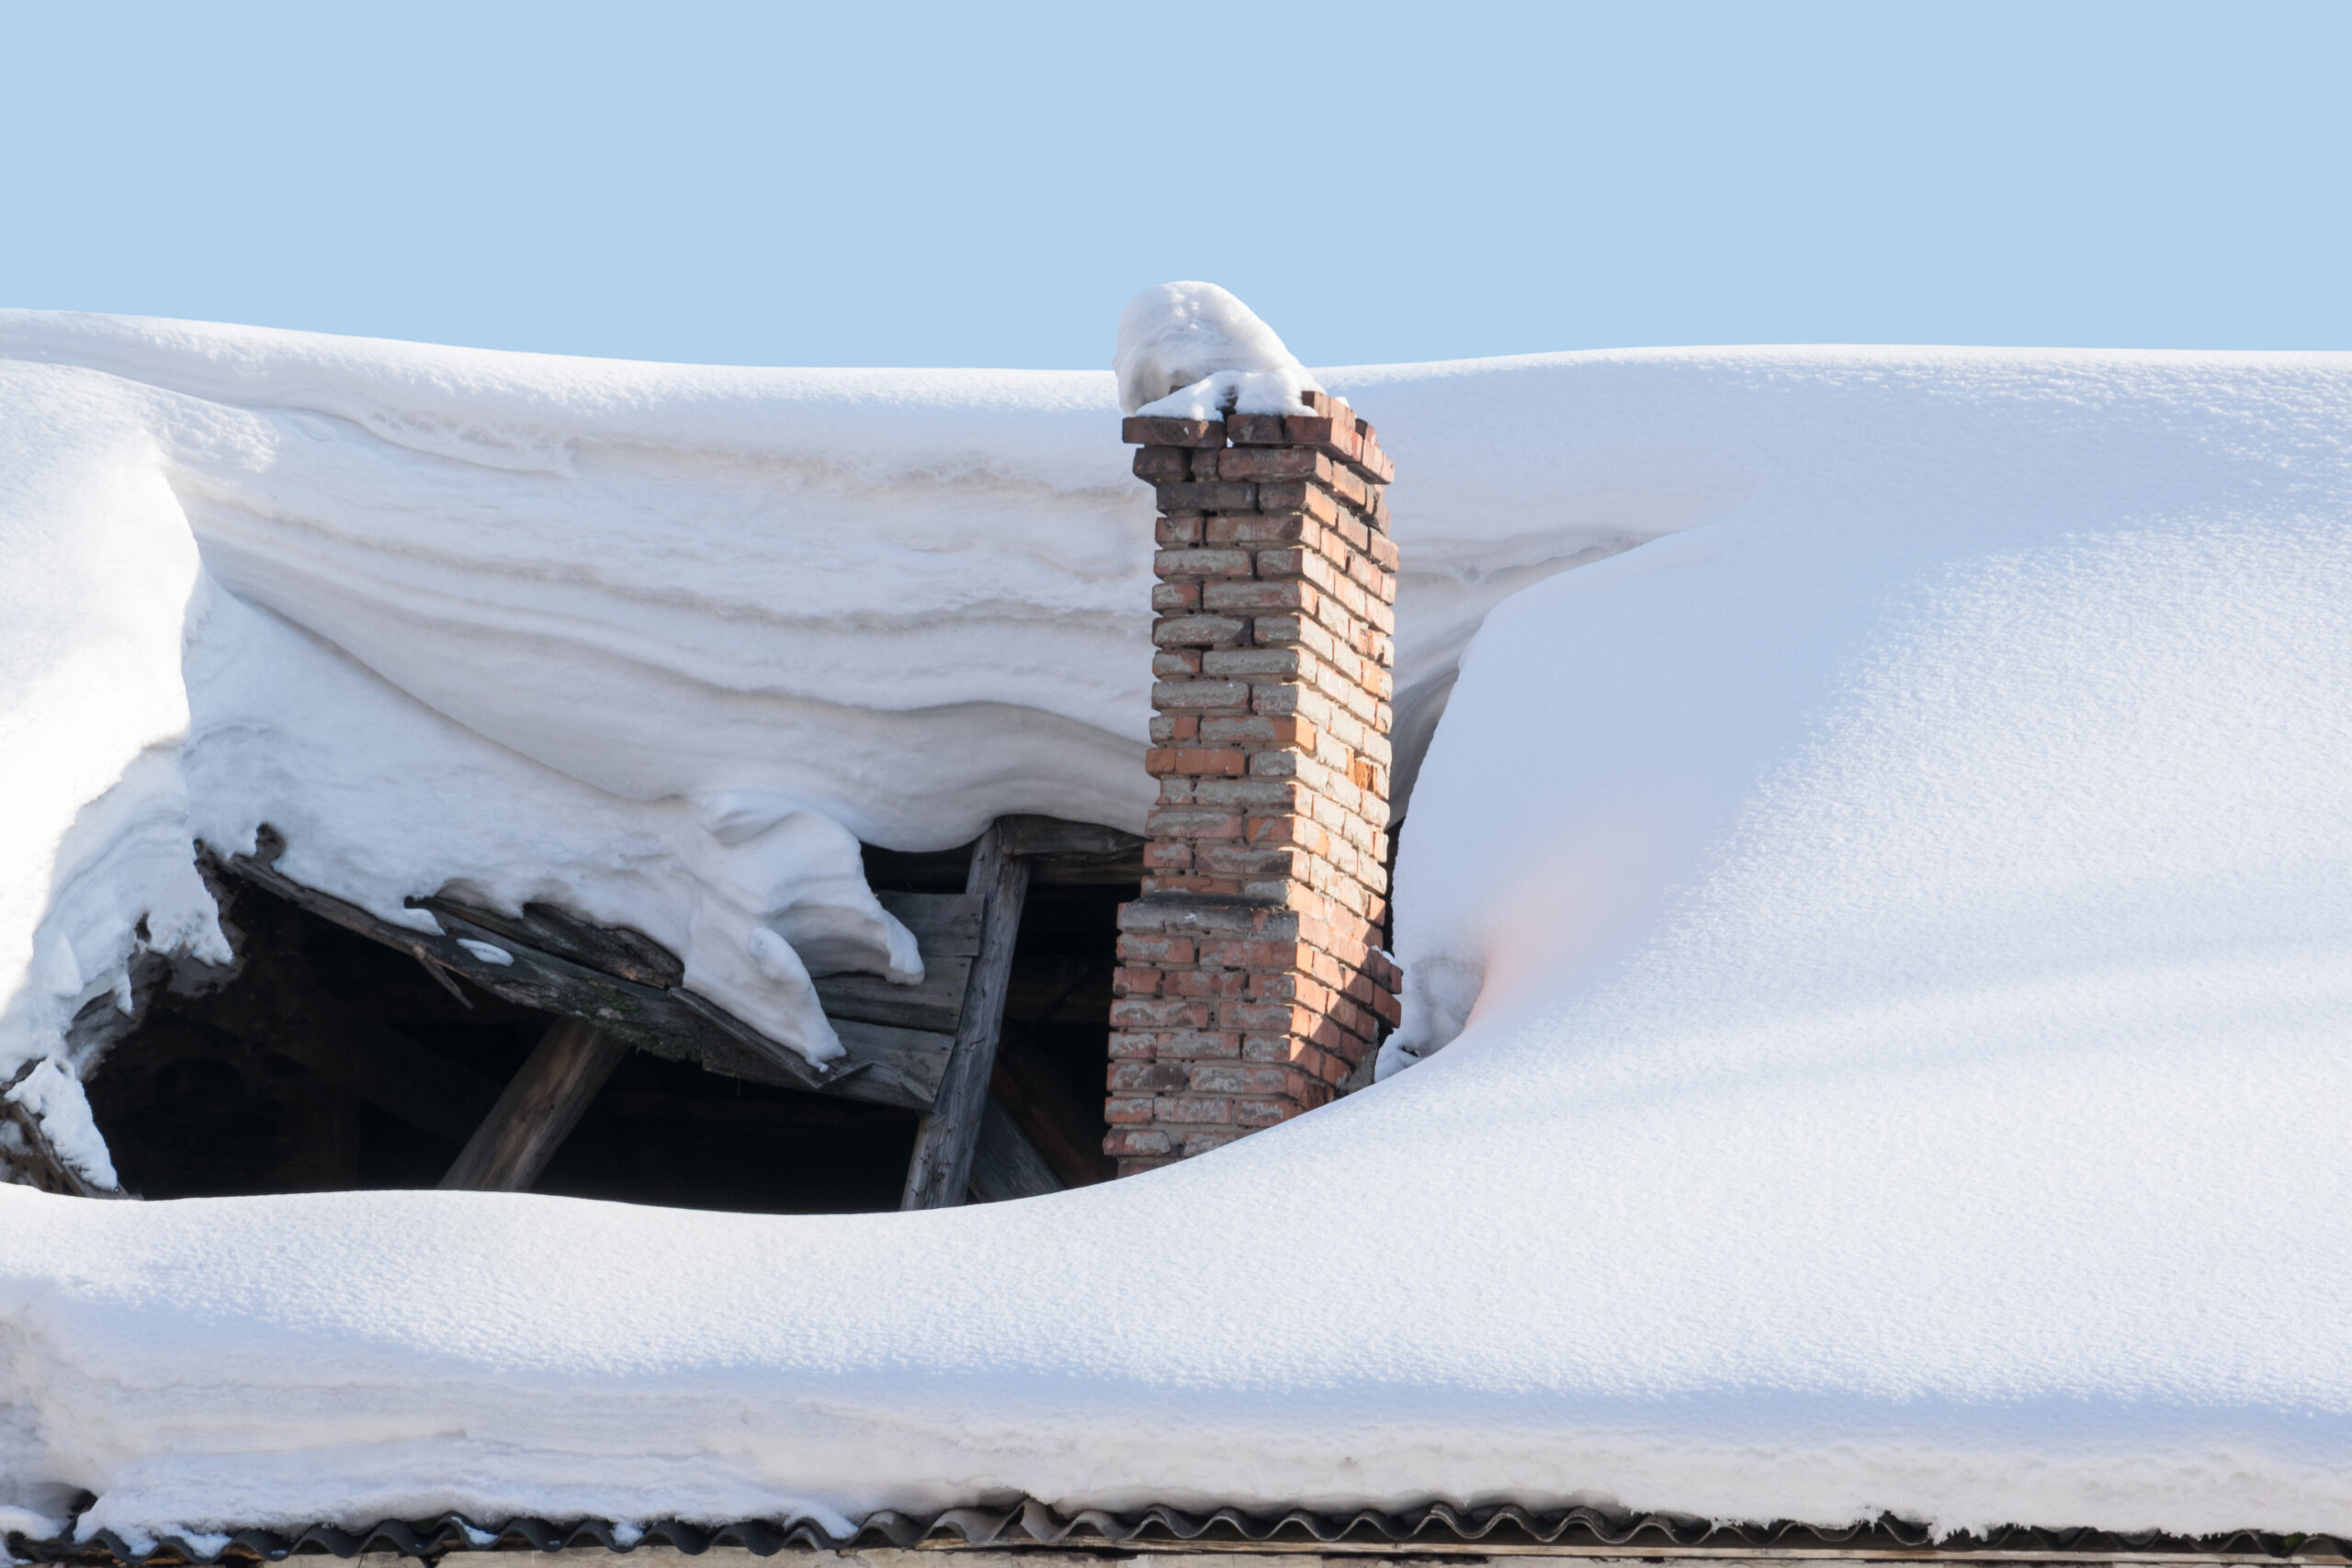 Roof collapse under weight of snow and ice, brick chimney